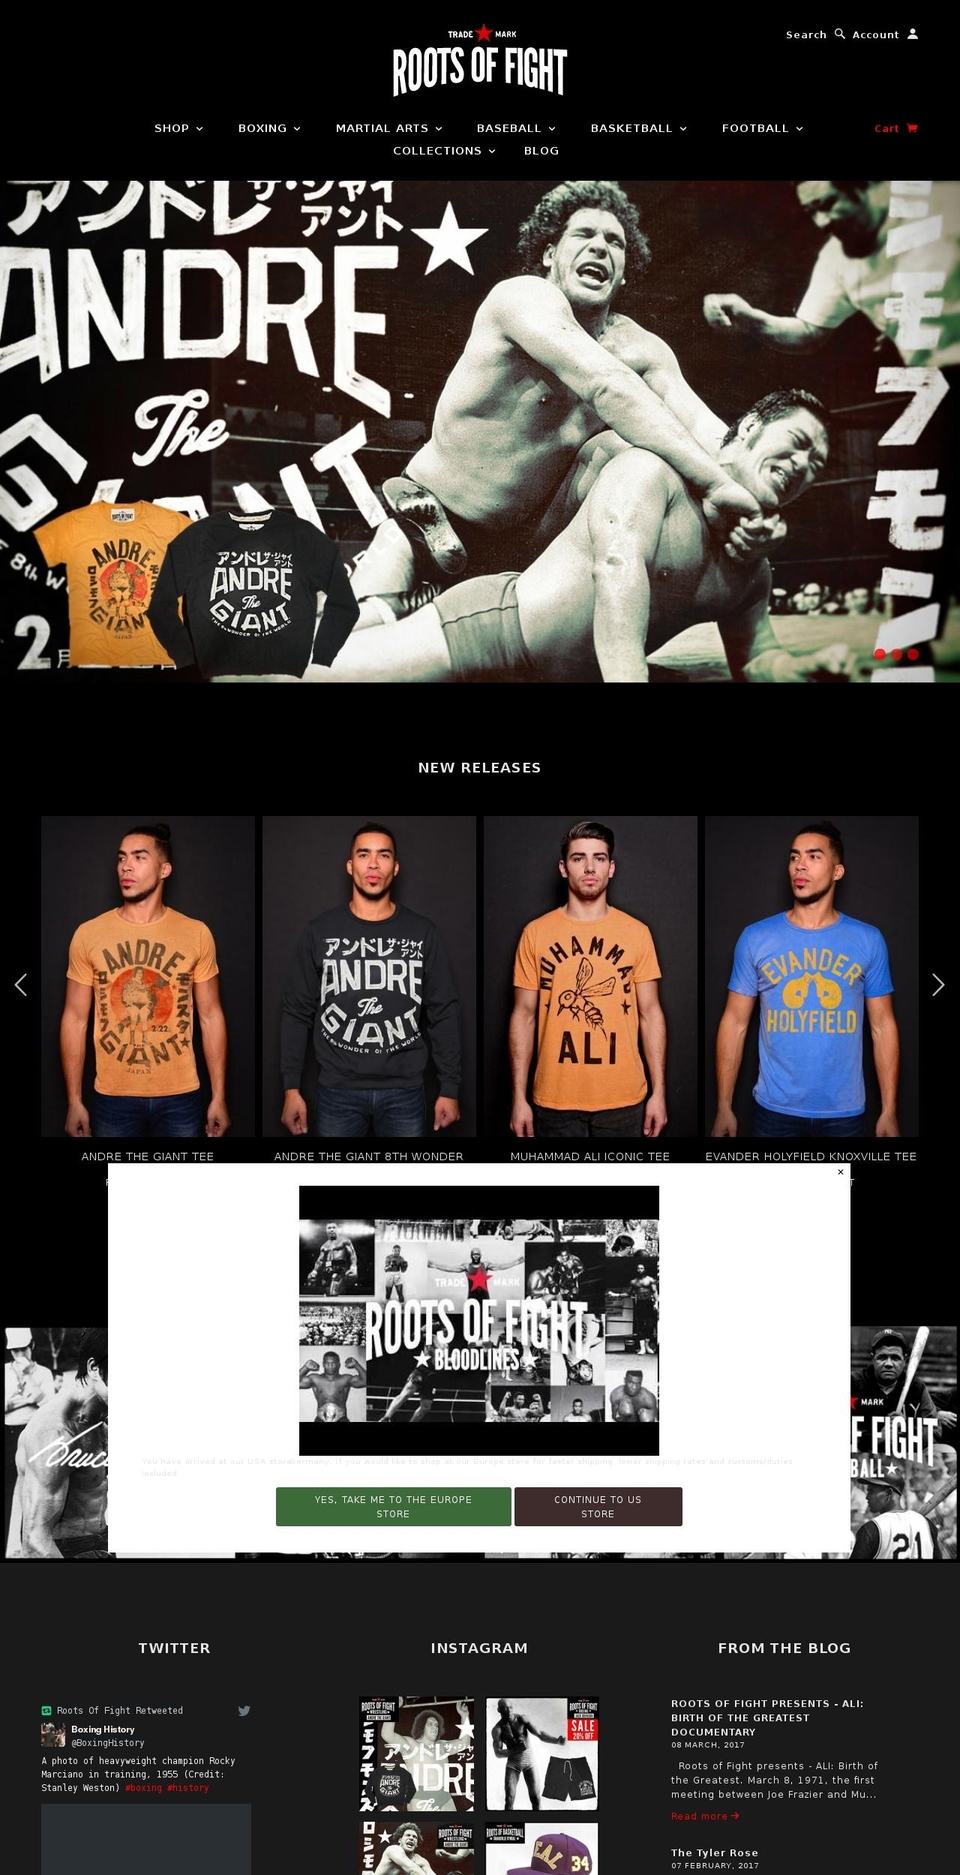 August Shopify theme site example rootsoffight.com